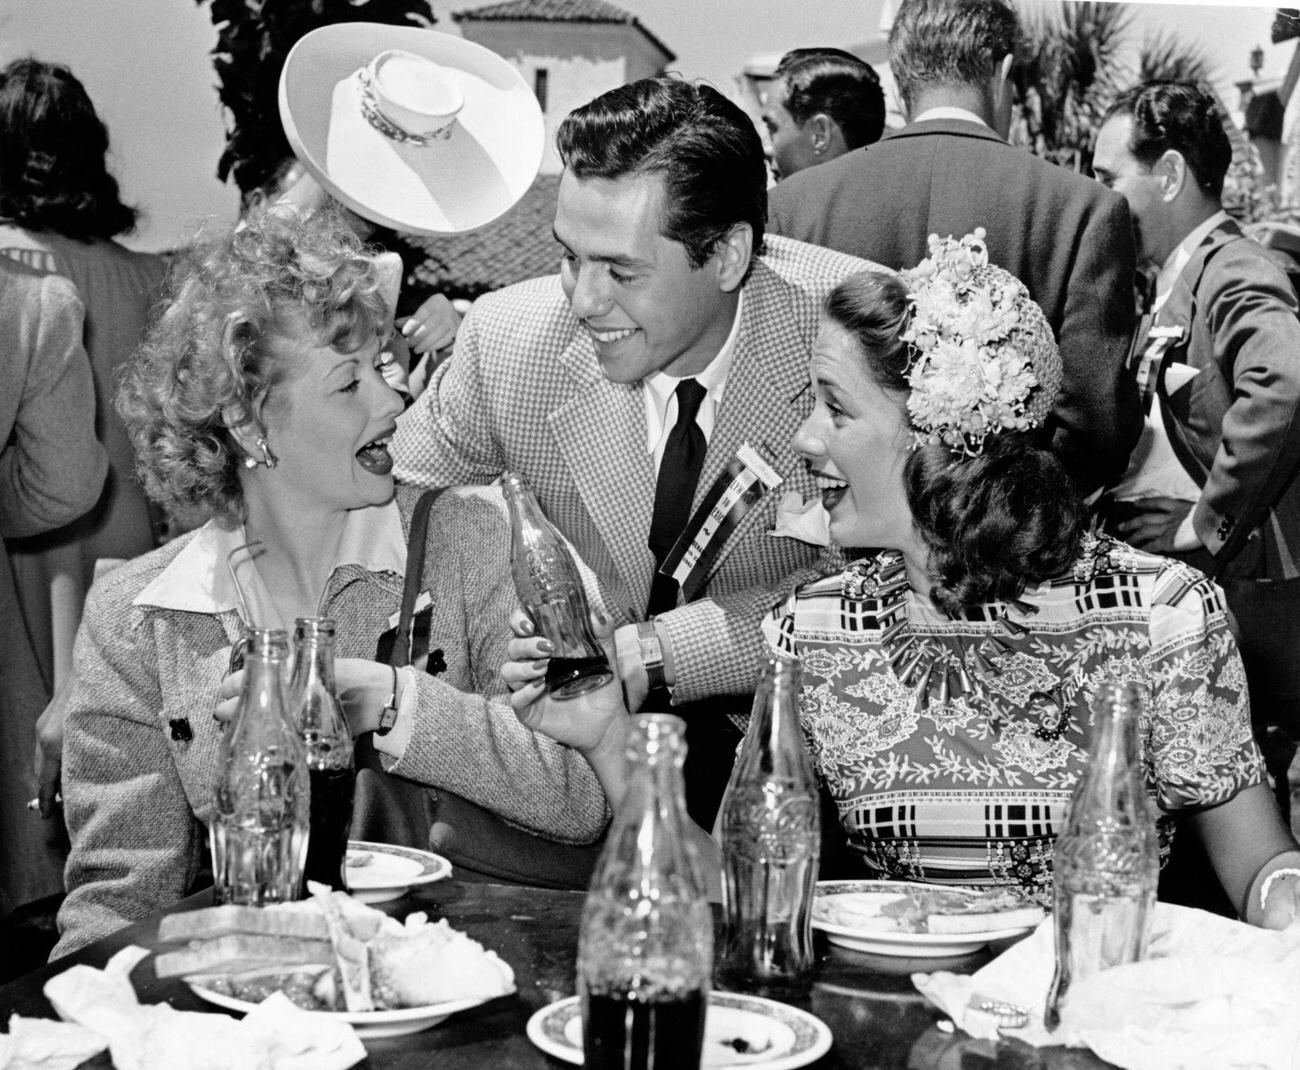 Married actors Lucille Ball and Desi Arnaz drinking Coca-Cola with actress Jinx Falkenburg, 1942.